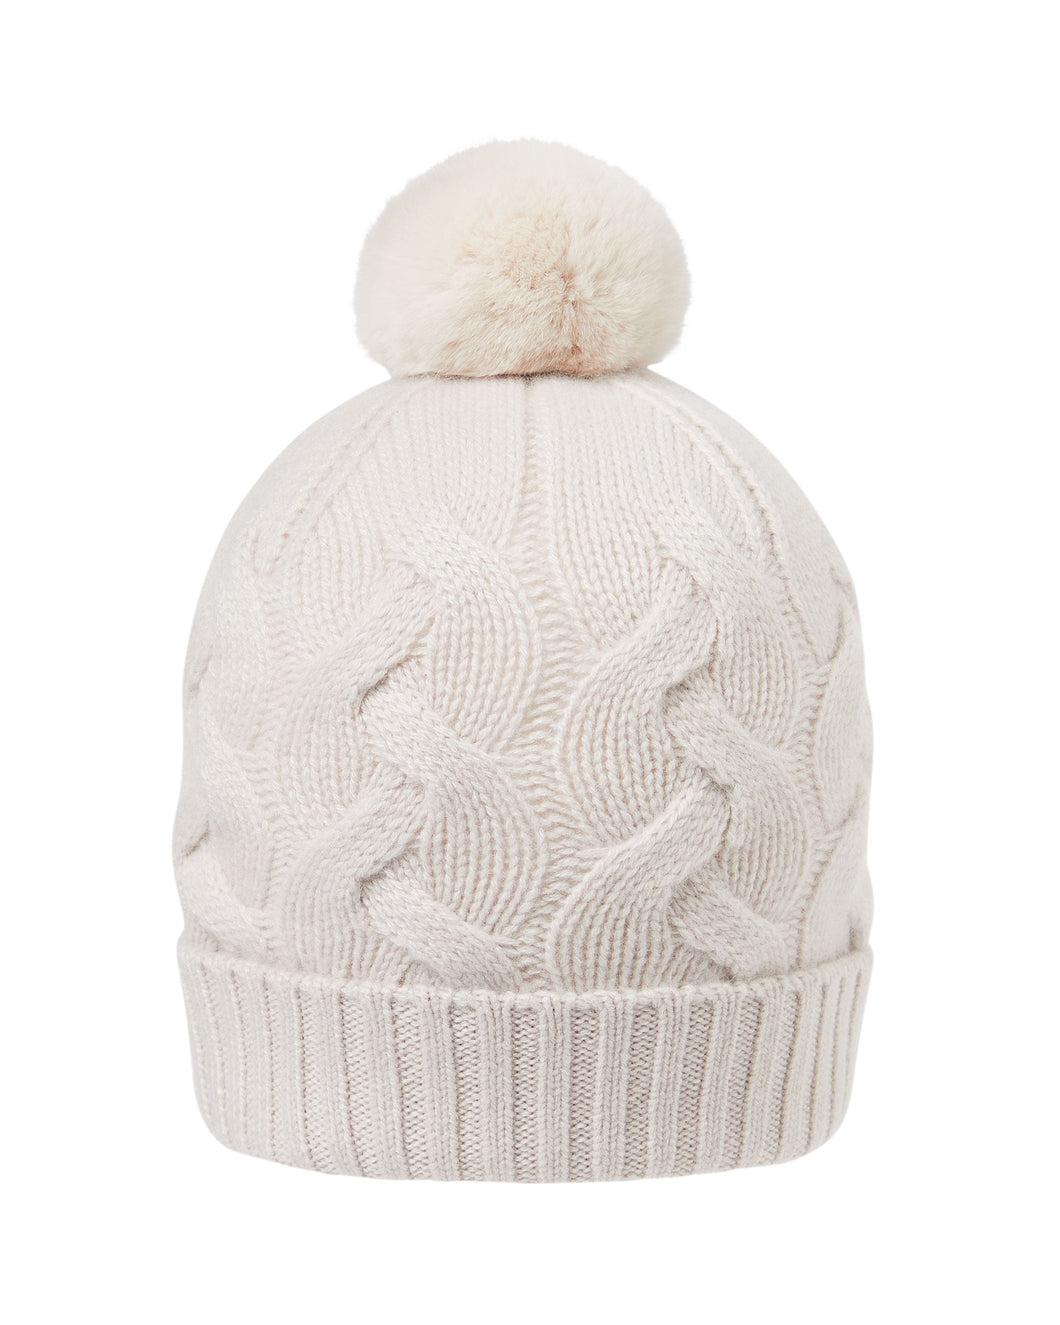 N.Peal Women's Cable Fur Pom Hat Snow Grey